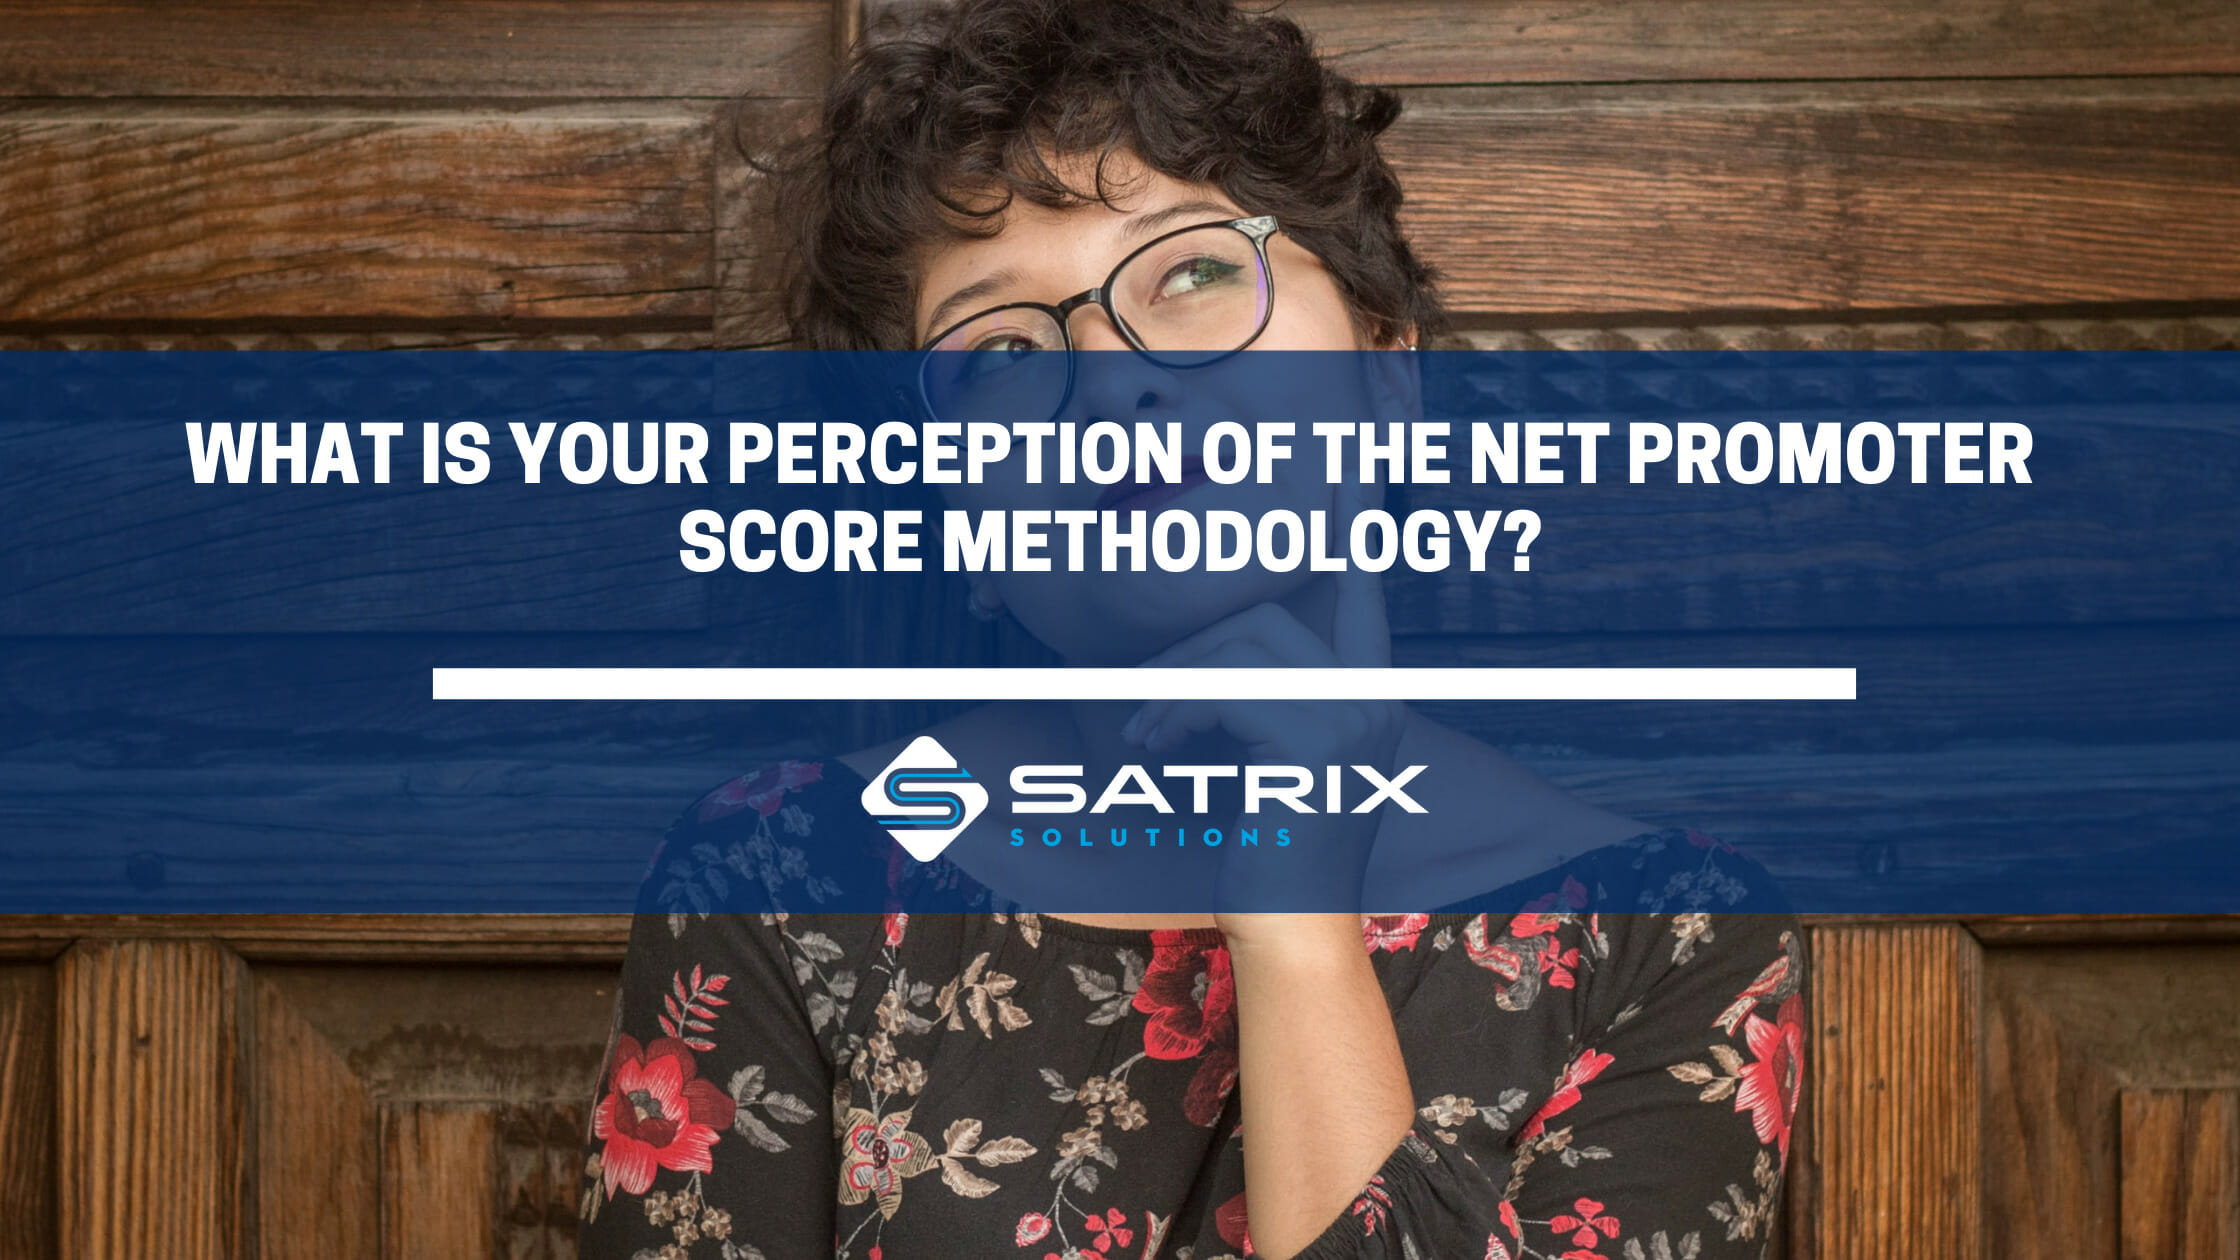 What is Your Perception of the Net Promoter Score Methodology?